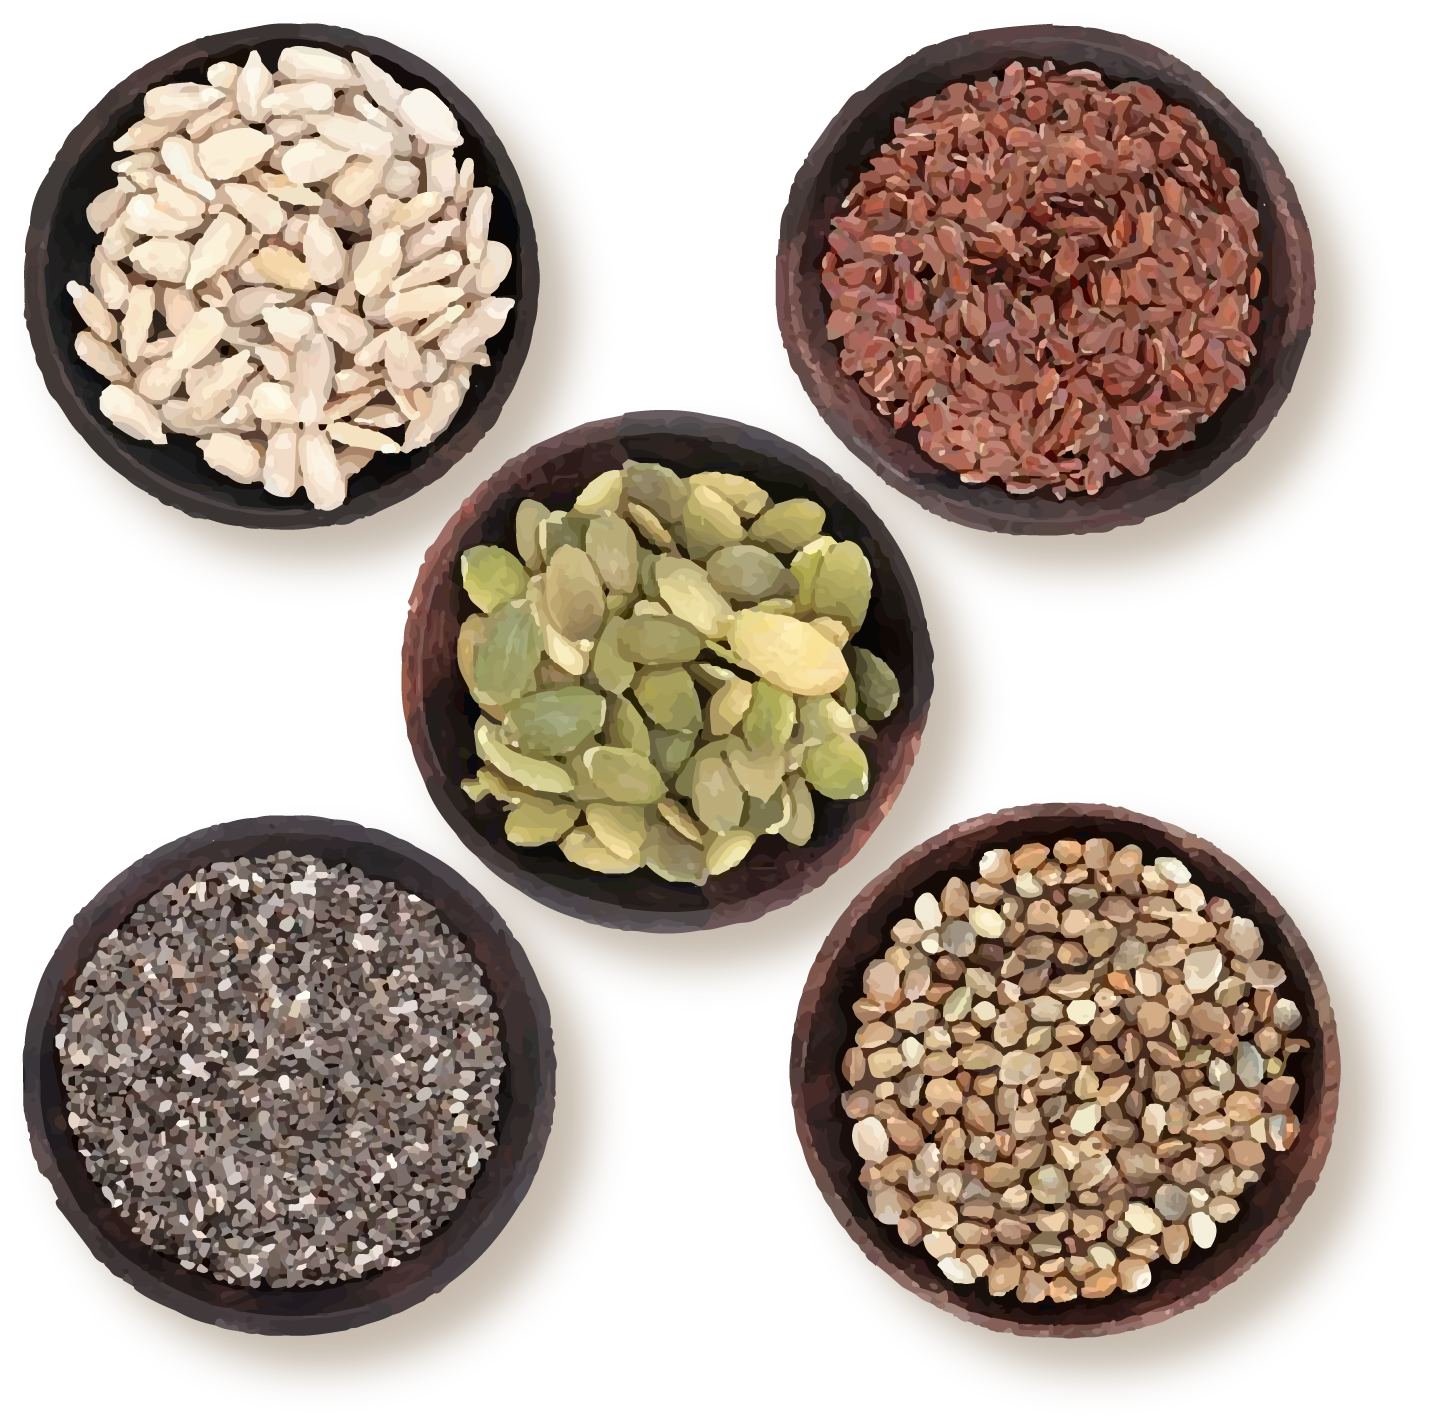 5 bowls of seeds, each a different kind.